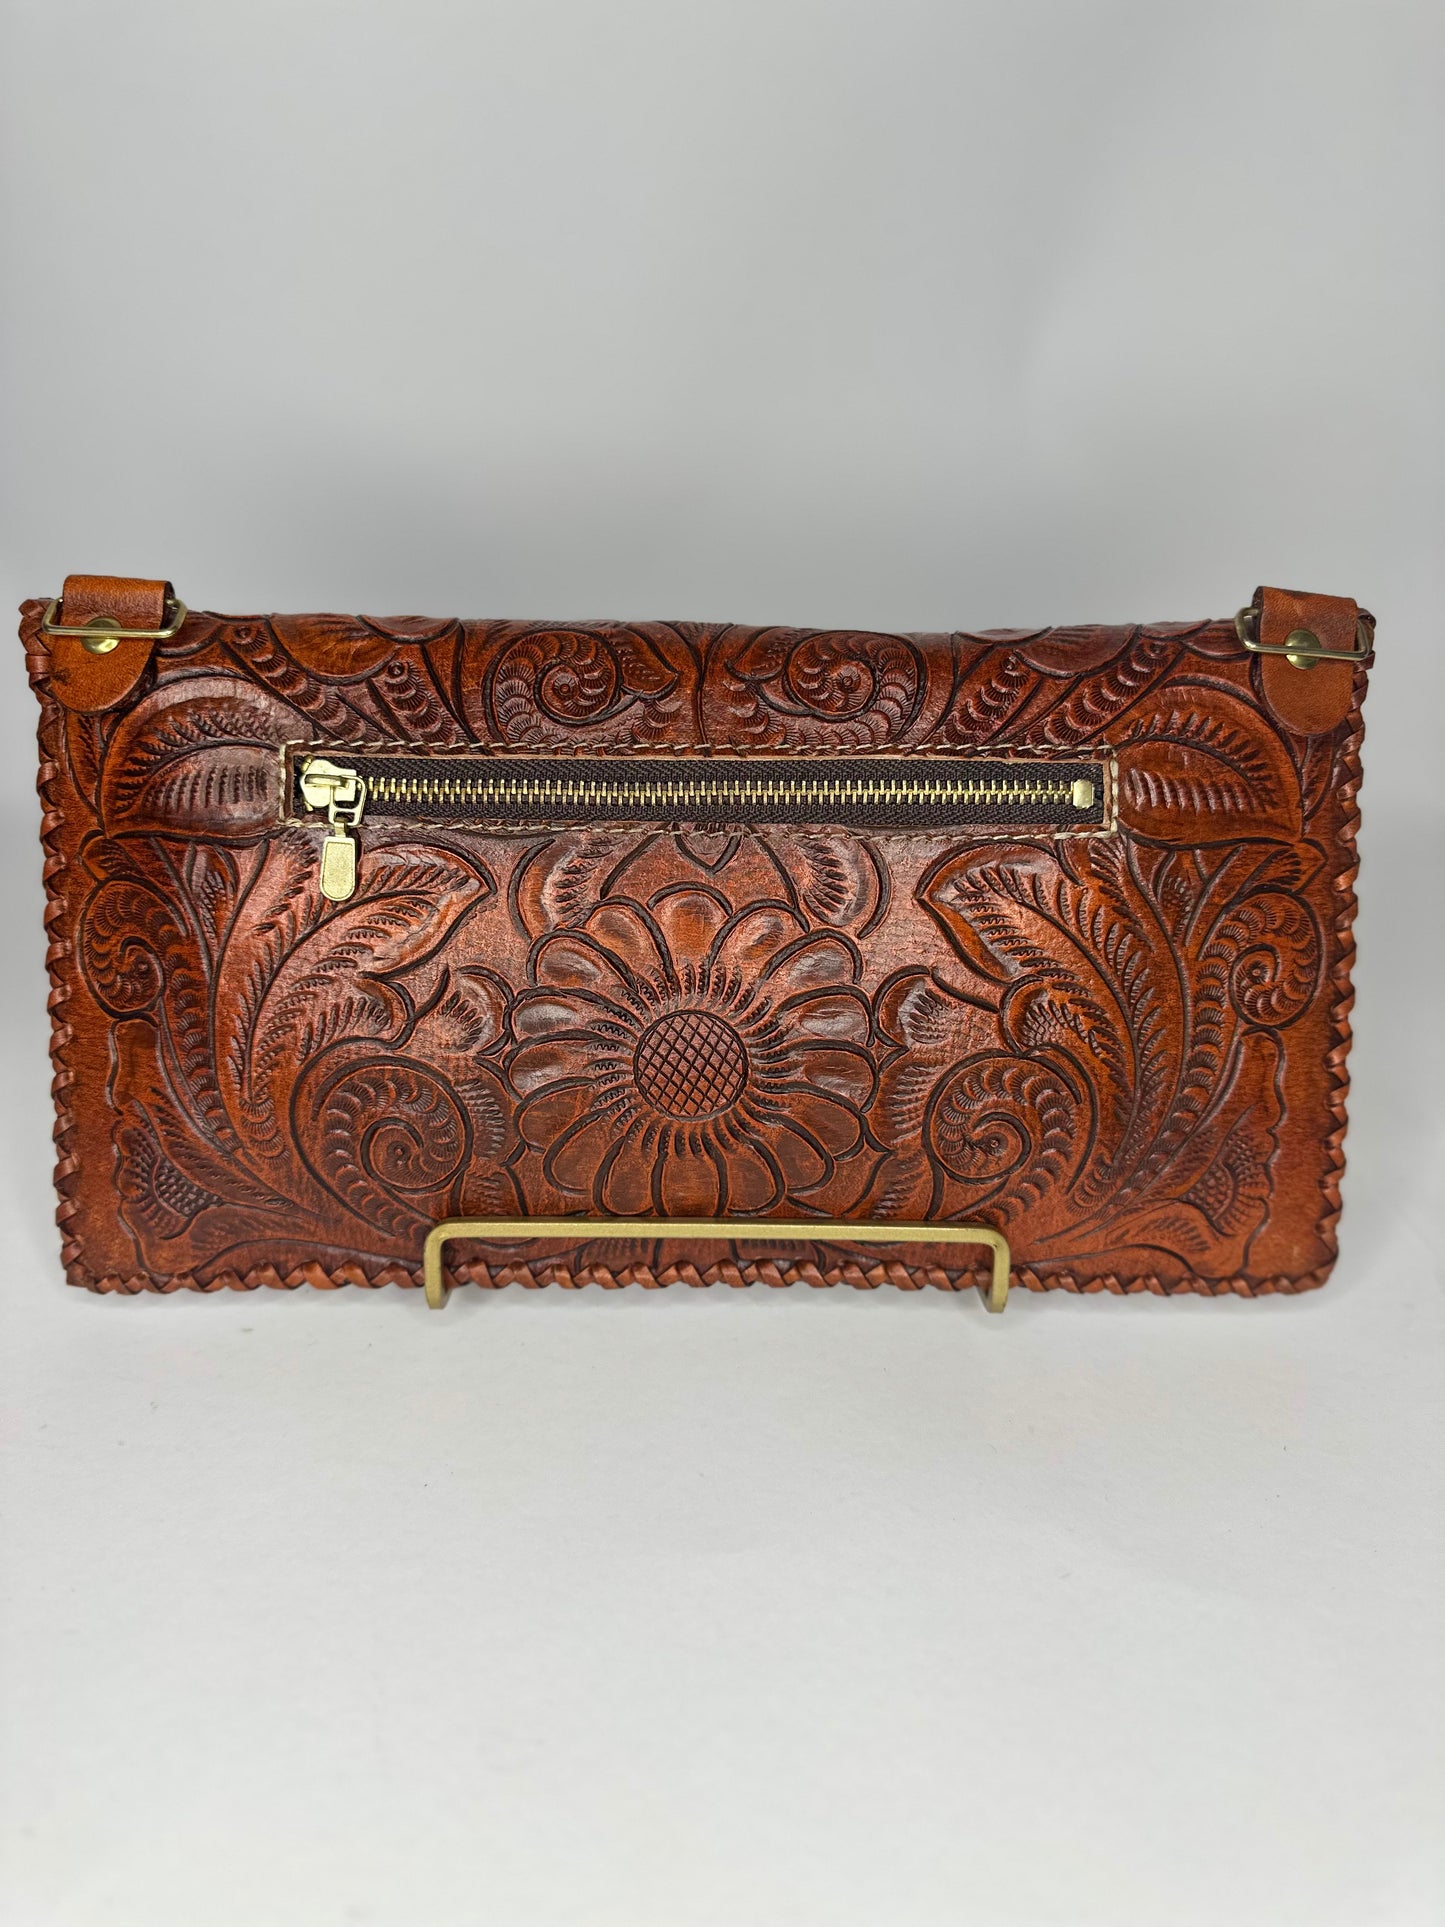 Handmade Mexican authentic leather clutch with floral design etched on top flap and back. Squared design etched on bottom half and zipper in back. color brown.